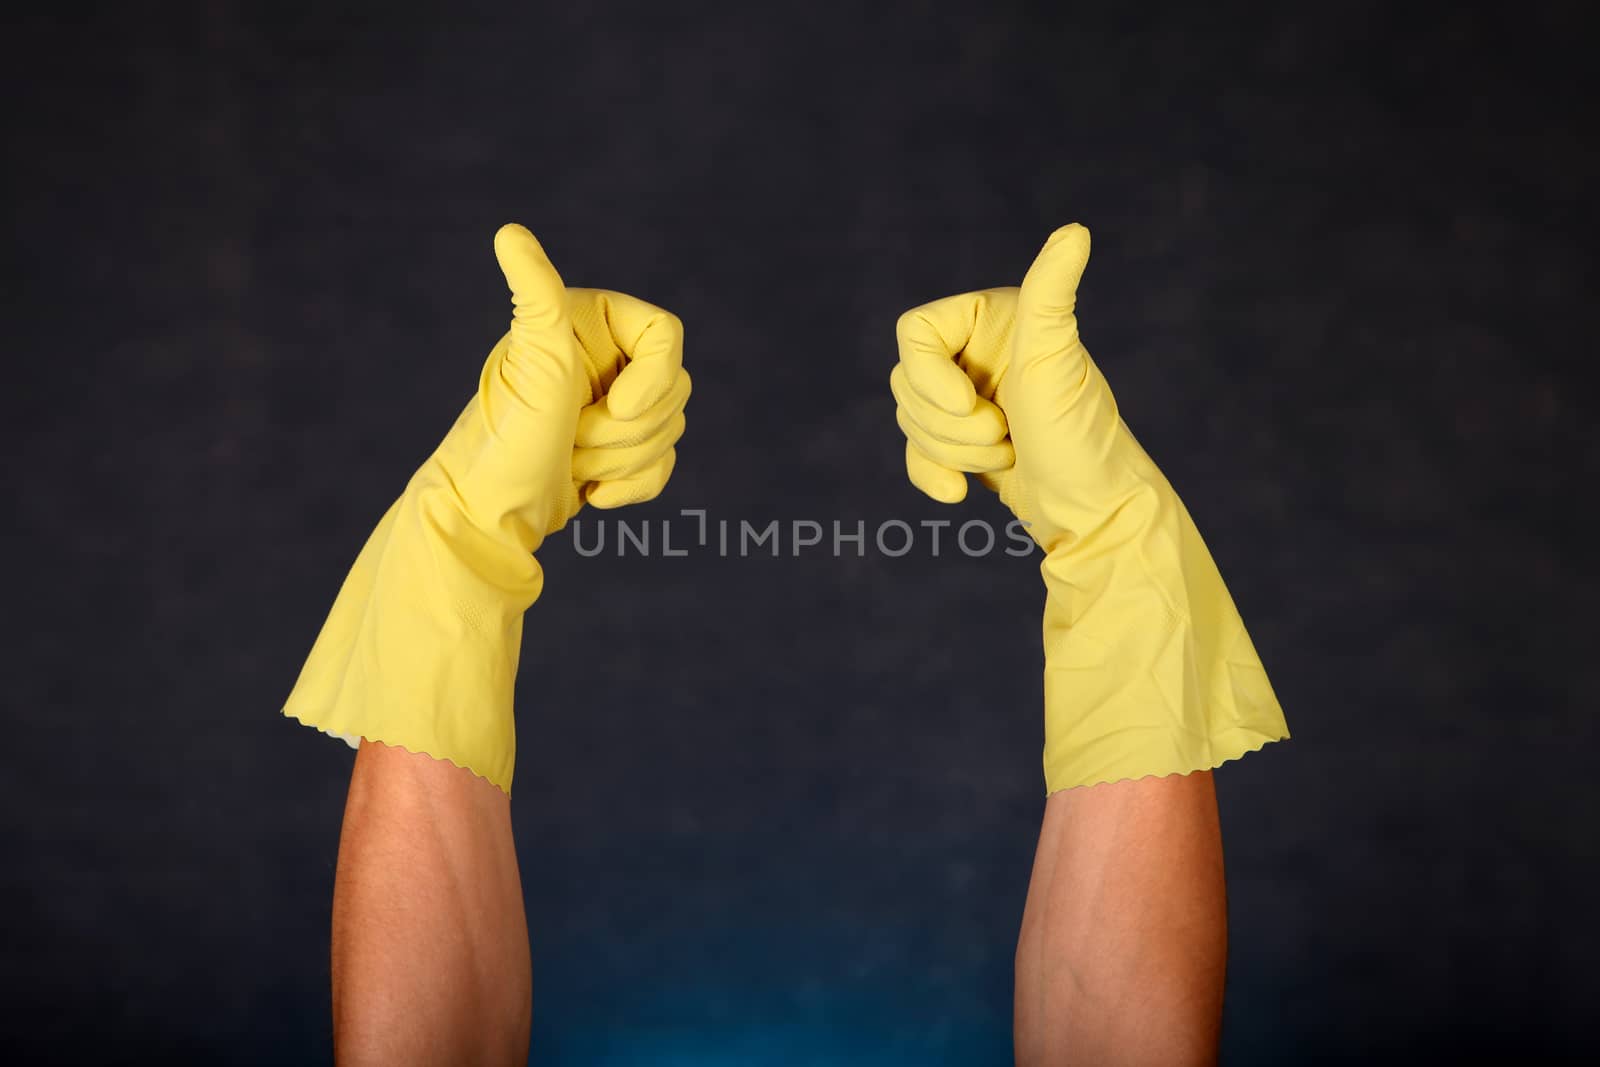 Hands in Rubber Gloves by sabphoto